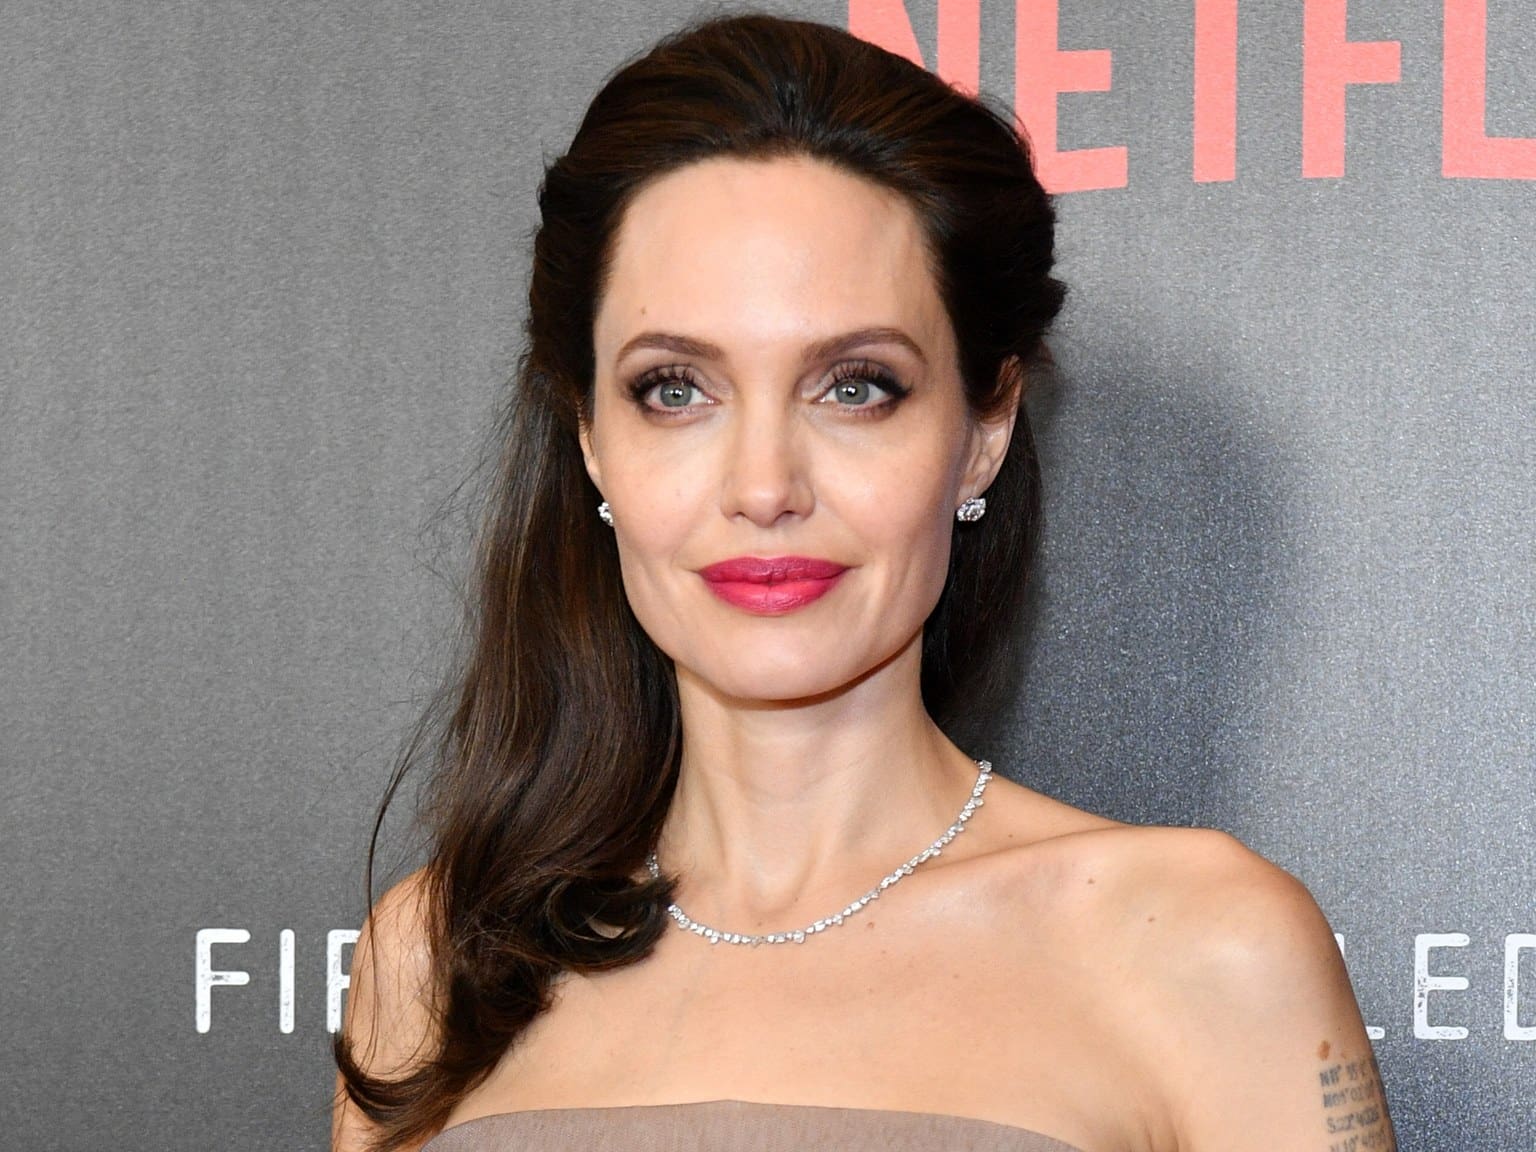 ”angelina-jolie-and-her-kids-have-been-enjoying-the-privacy-while-in-albuquerque-details”